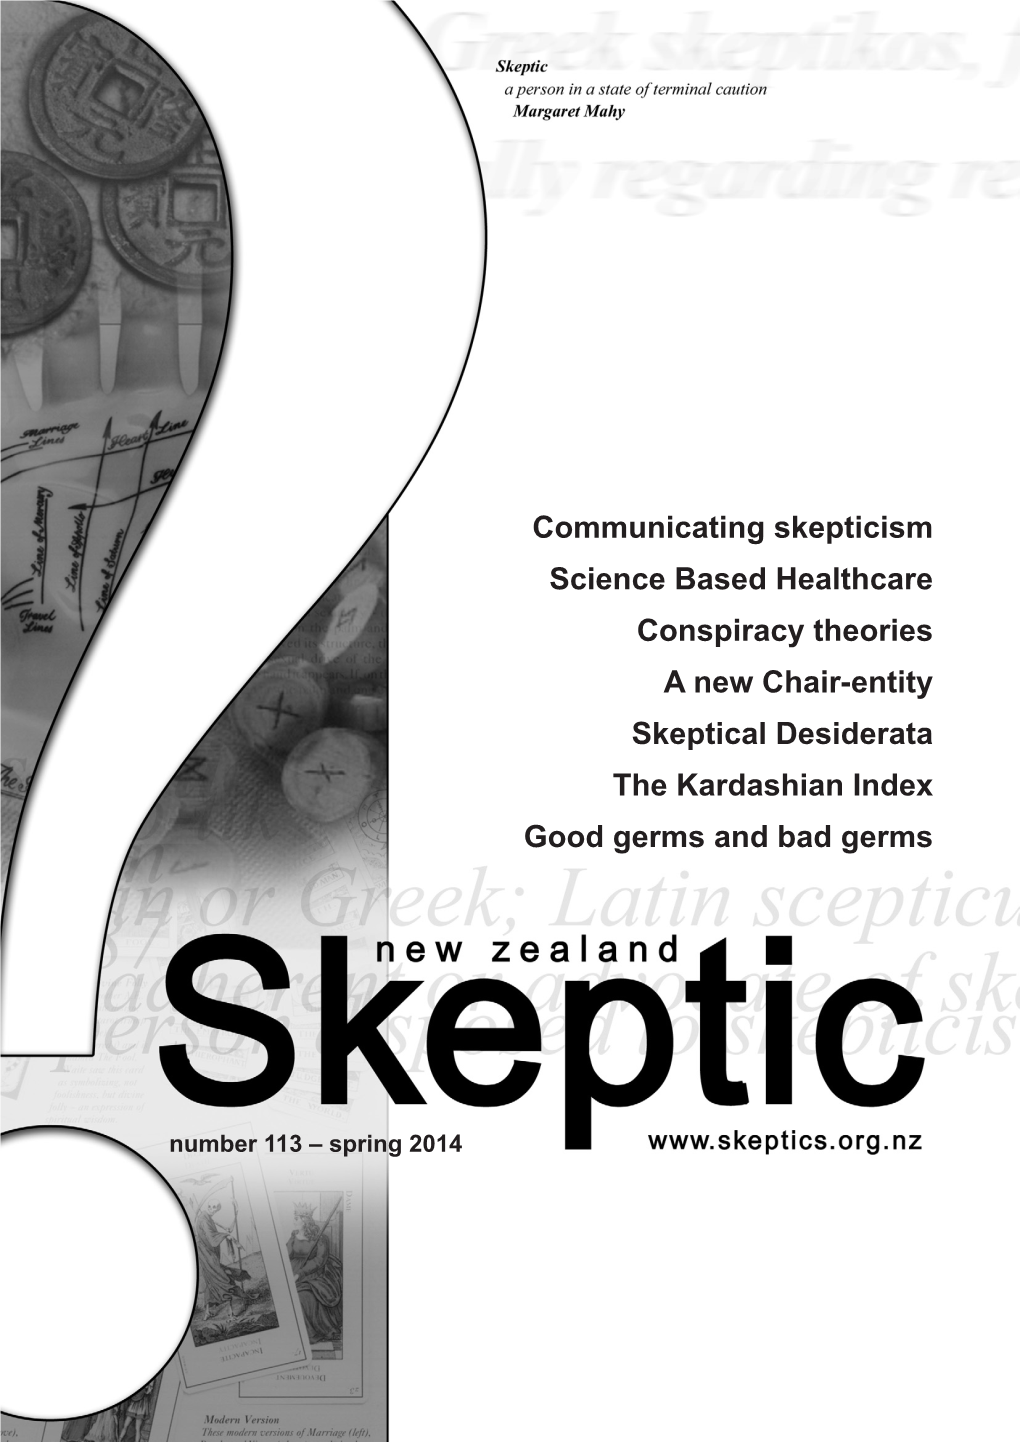 Communicating Skepticism Science Based Healthcare Conspiracy Theories a New Chair-Entity Skeptical Desiderata the Kardashian Index Good Germs and Bad Germs